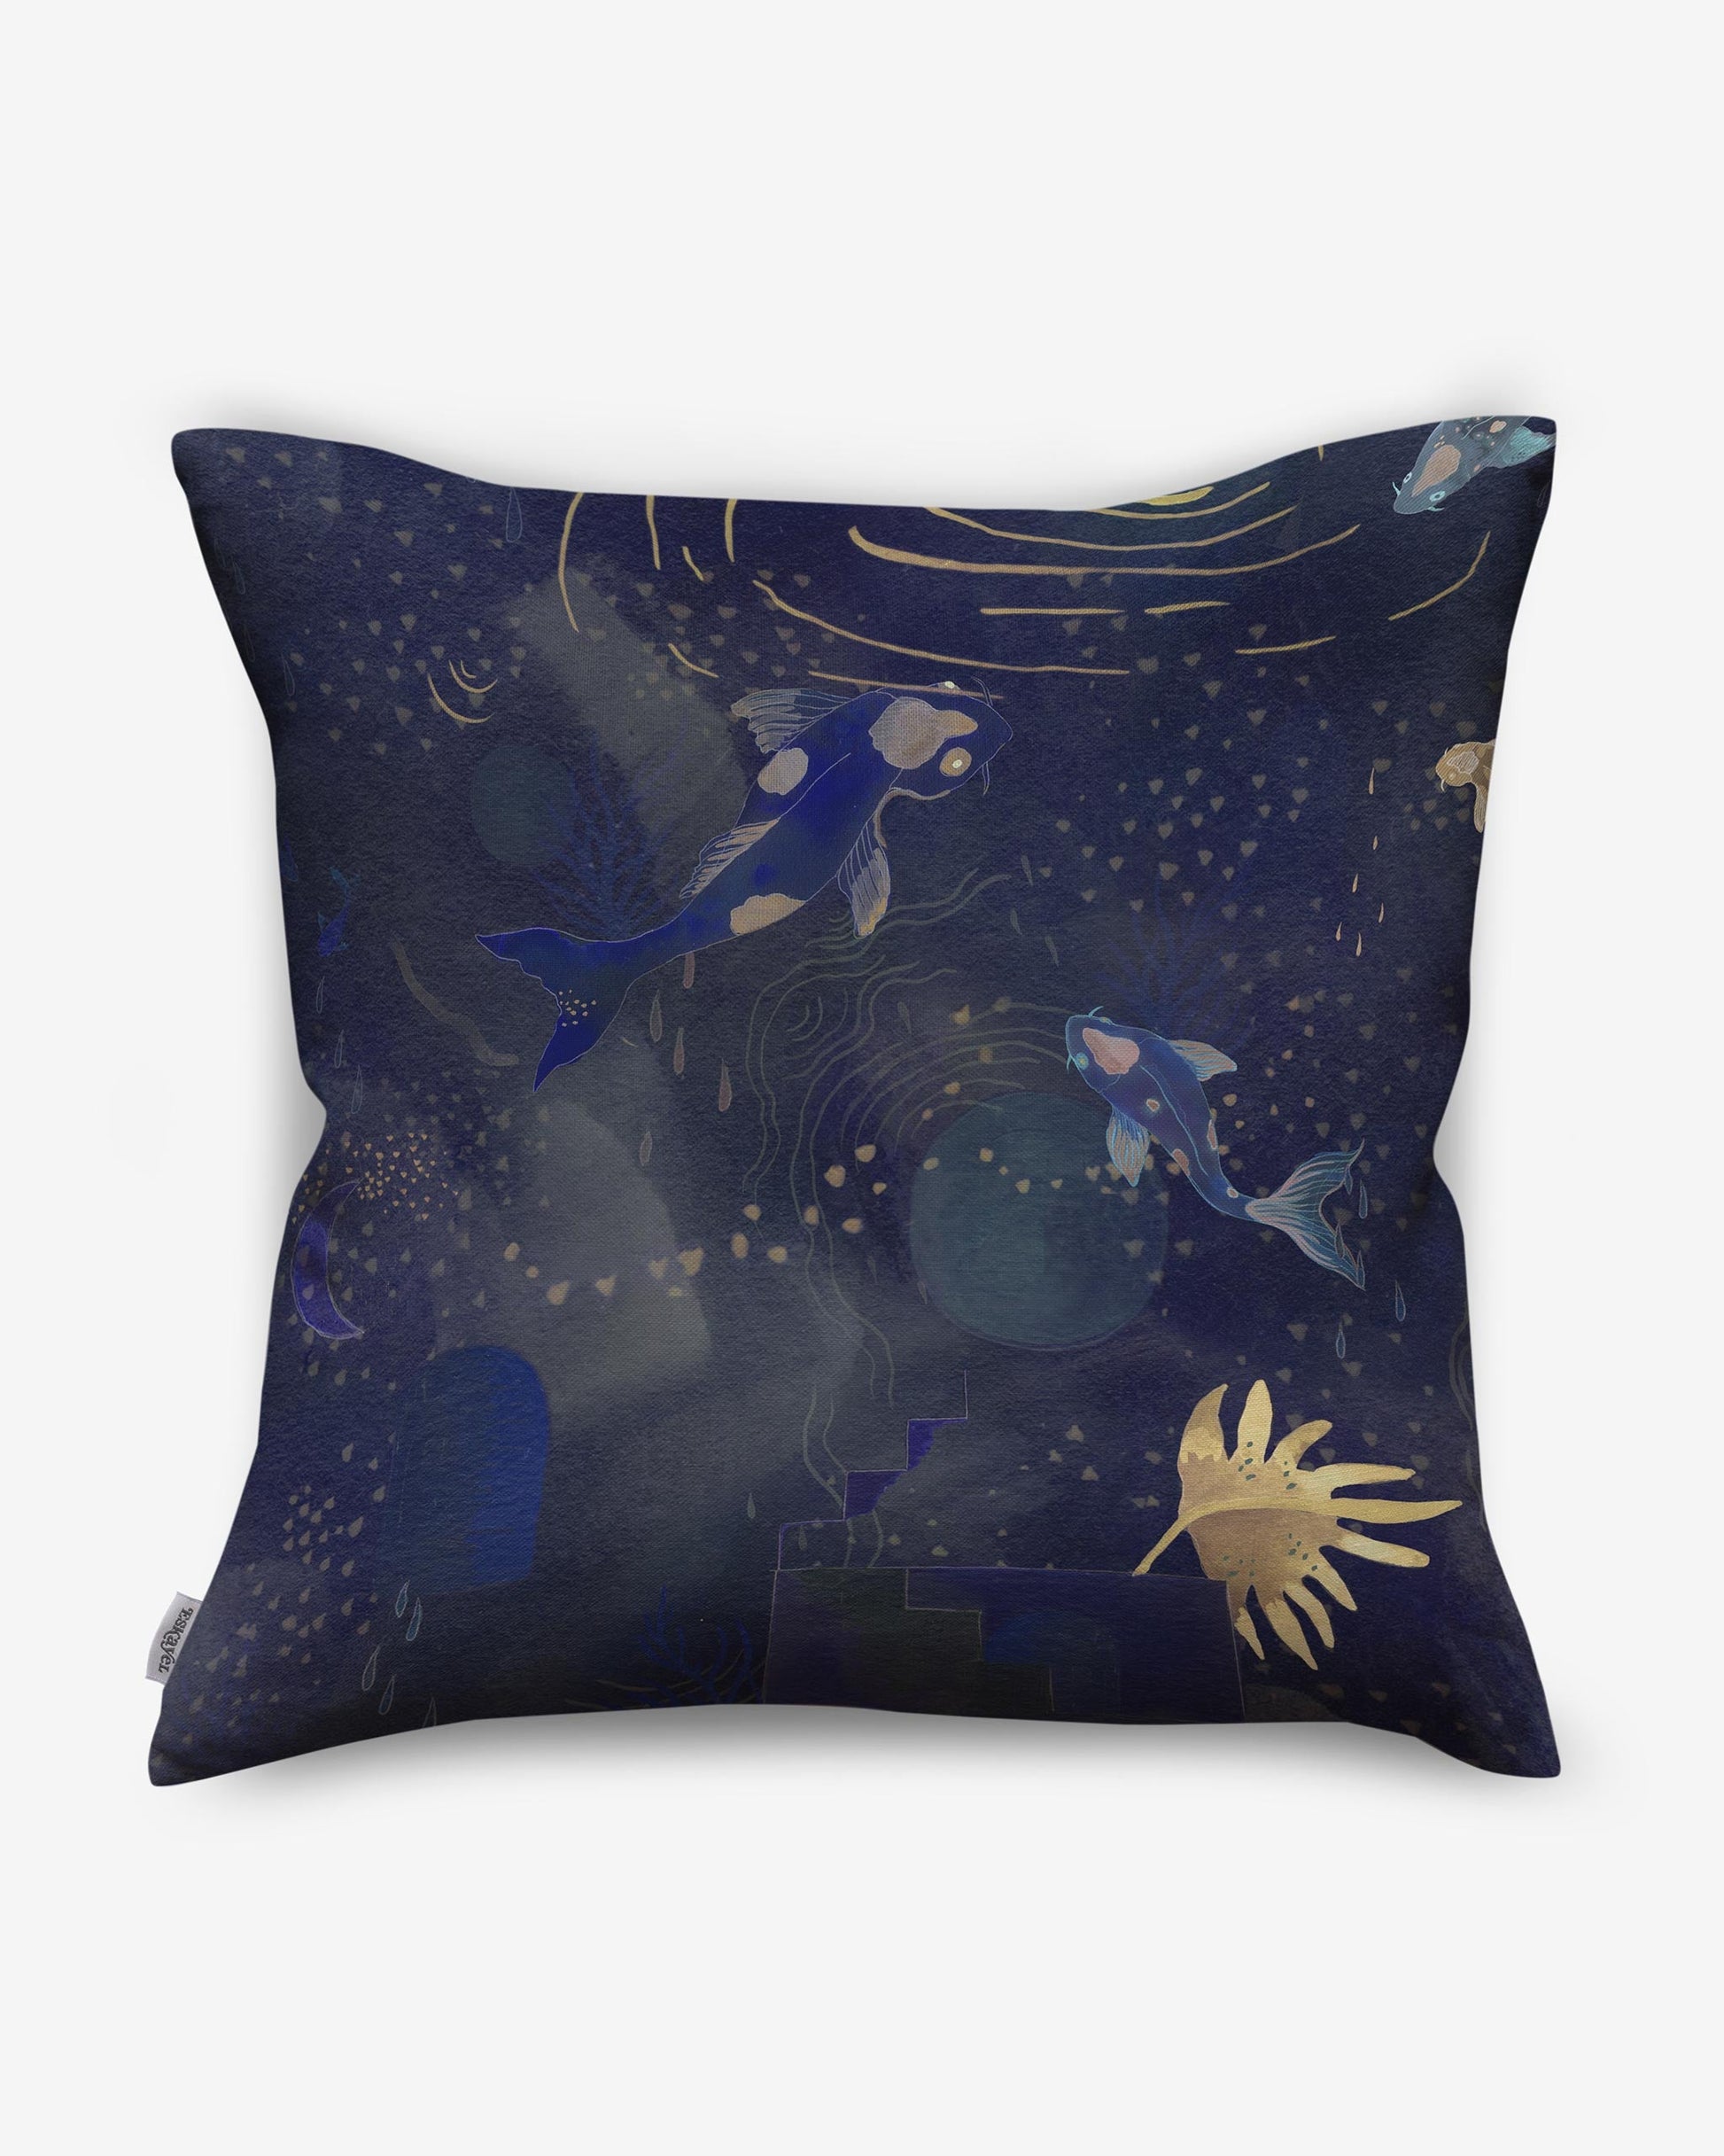 A high-end Water Signs fabric pillow with an indigo background adorned with fish and stars